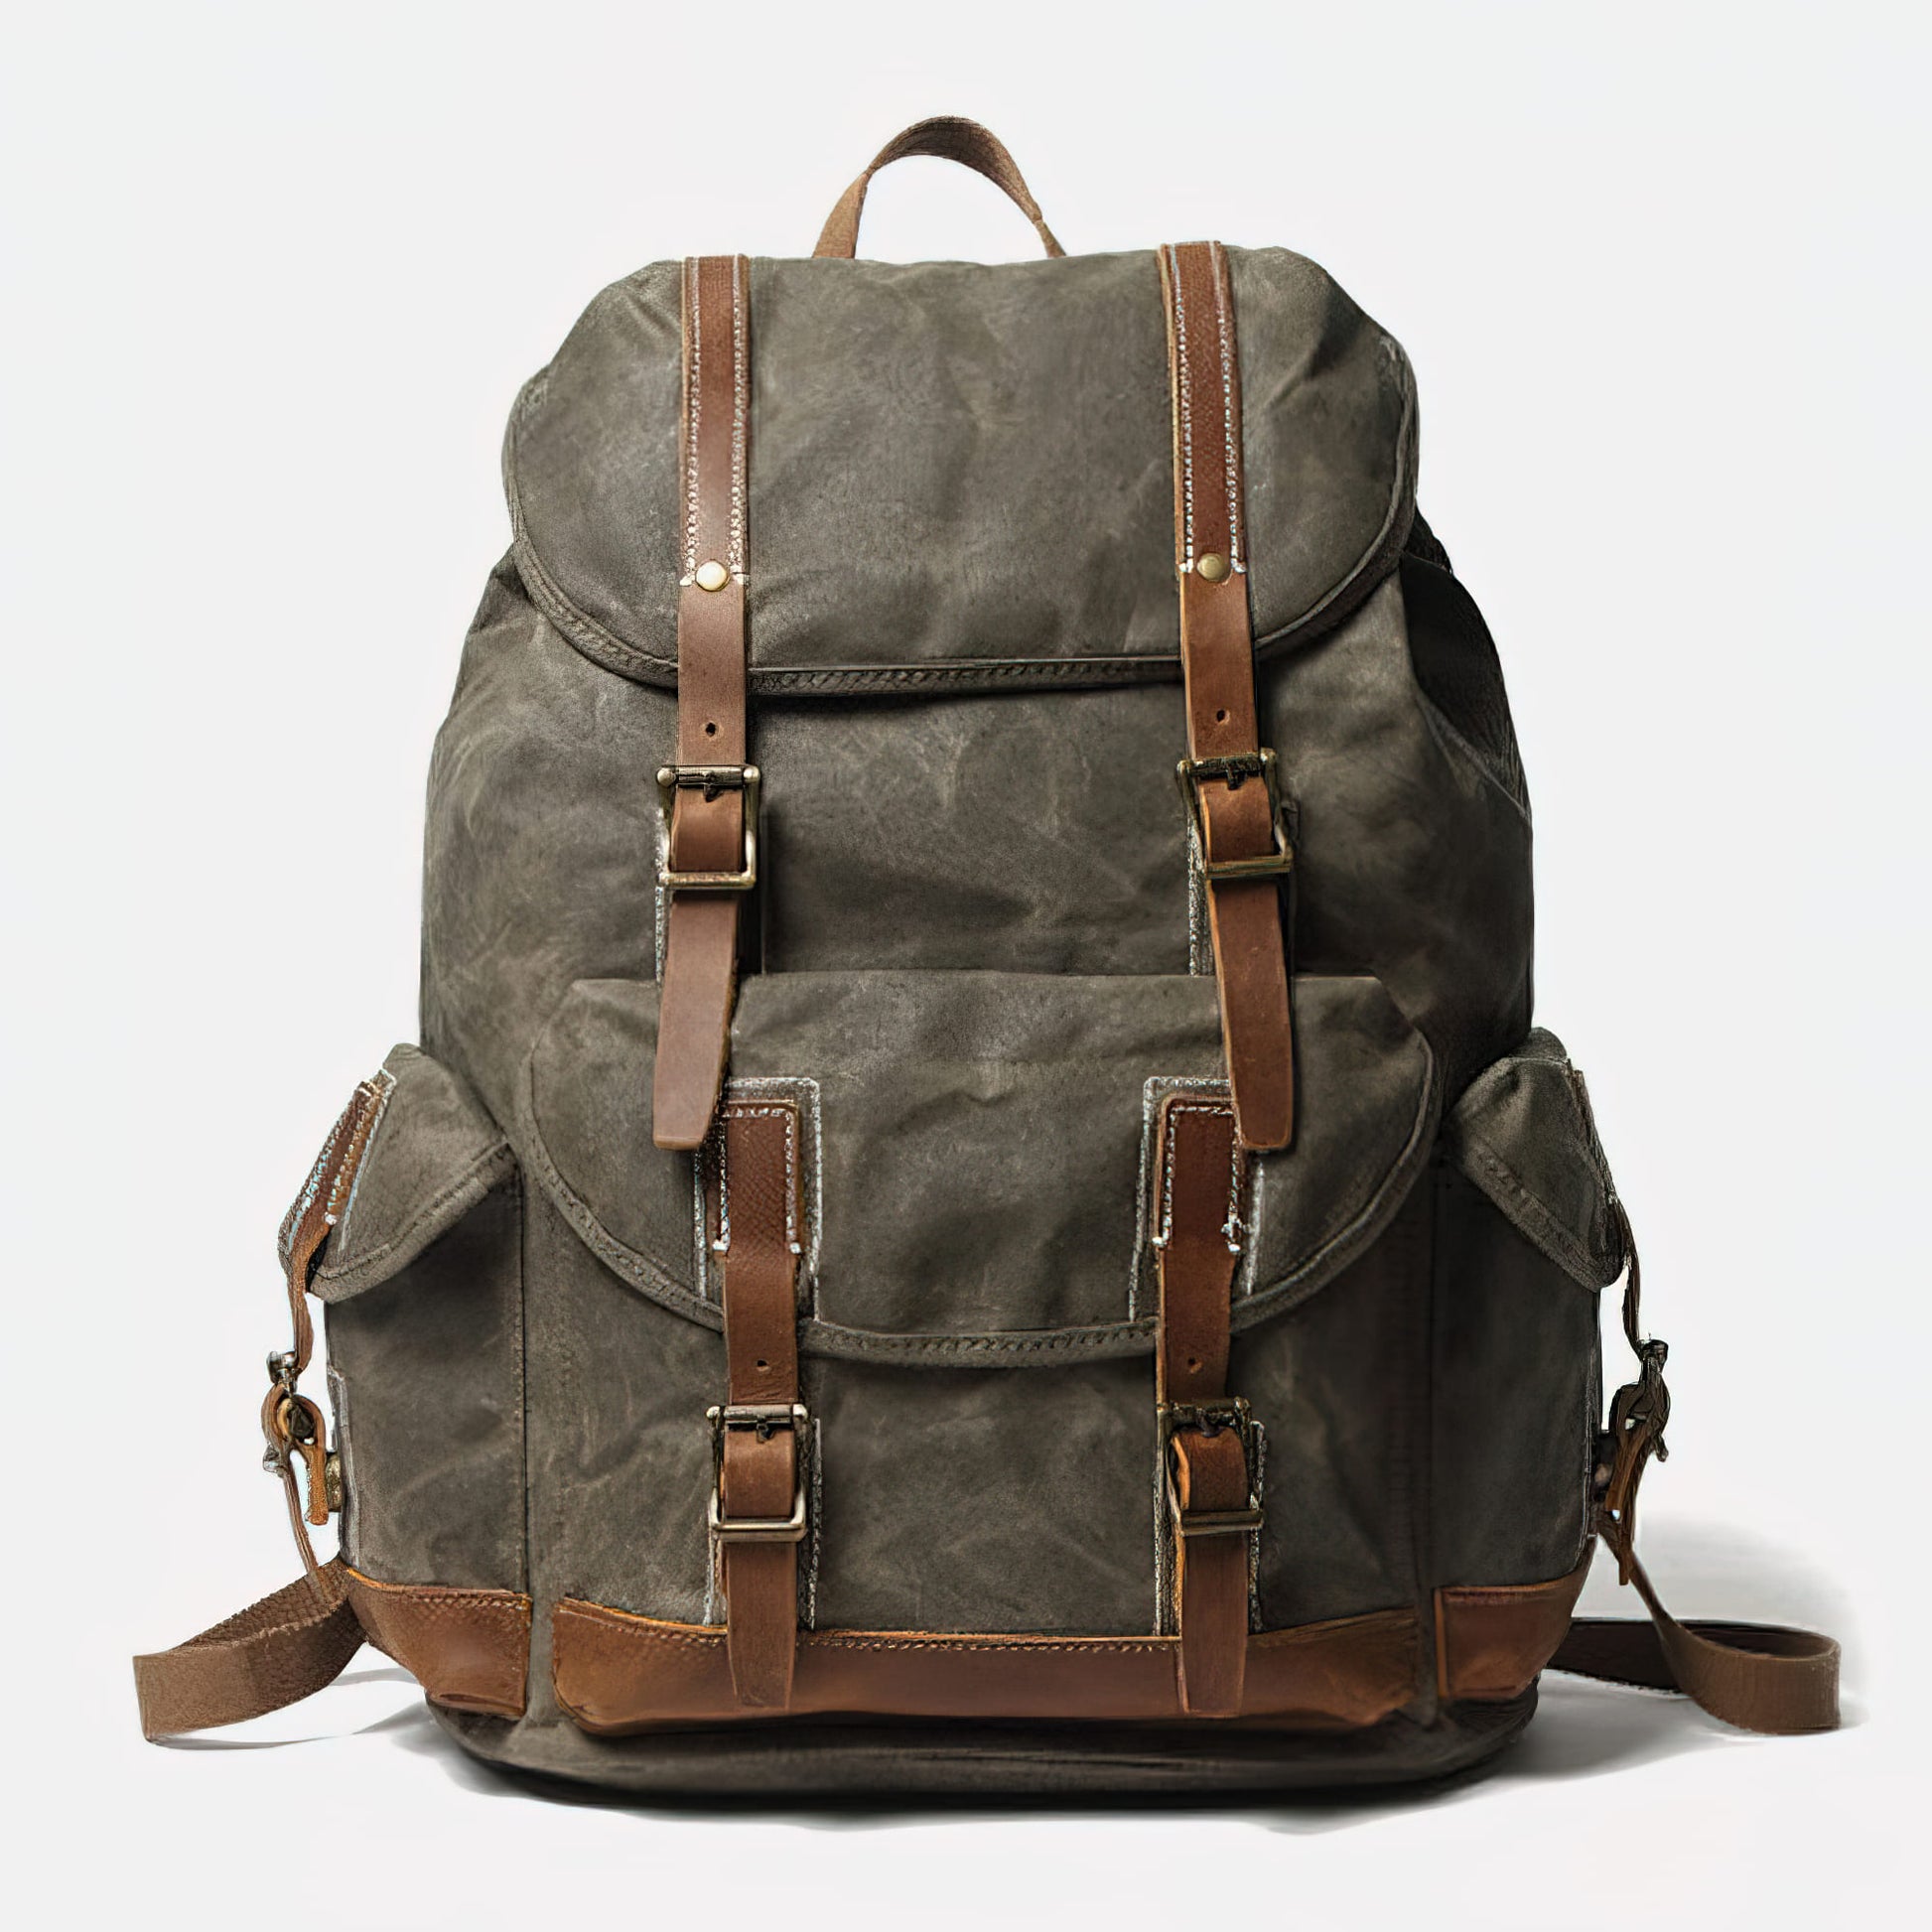 Large Waxed Canvas Backpack, Travel Backpack